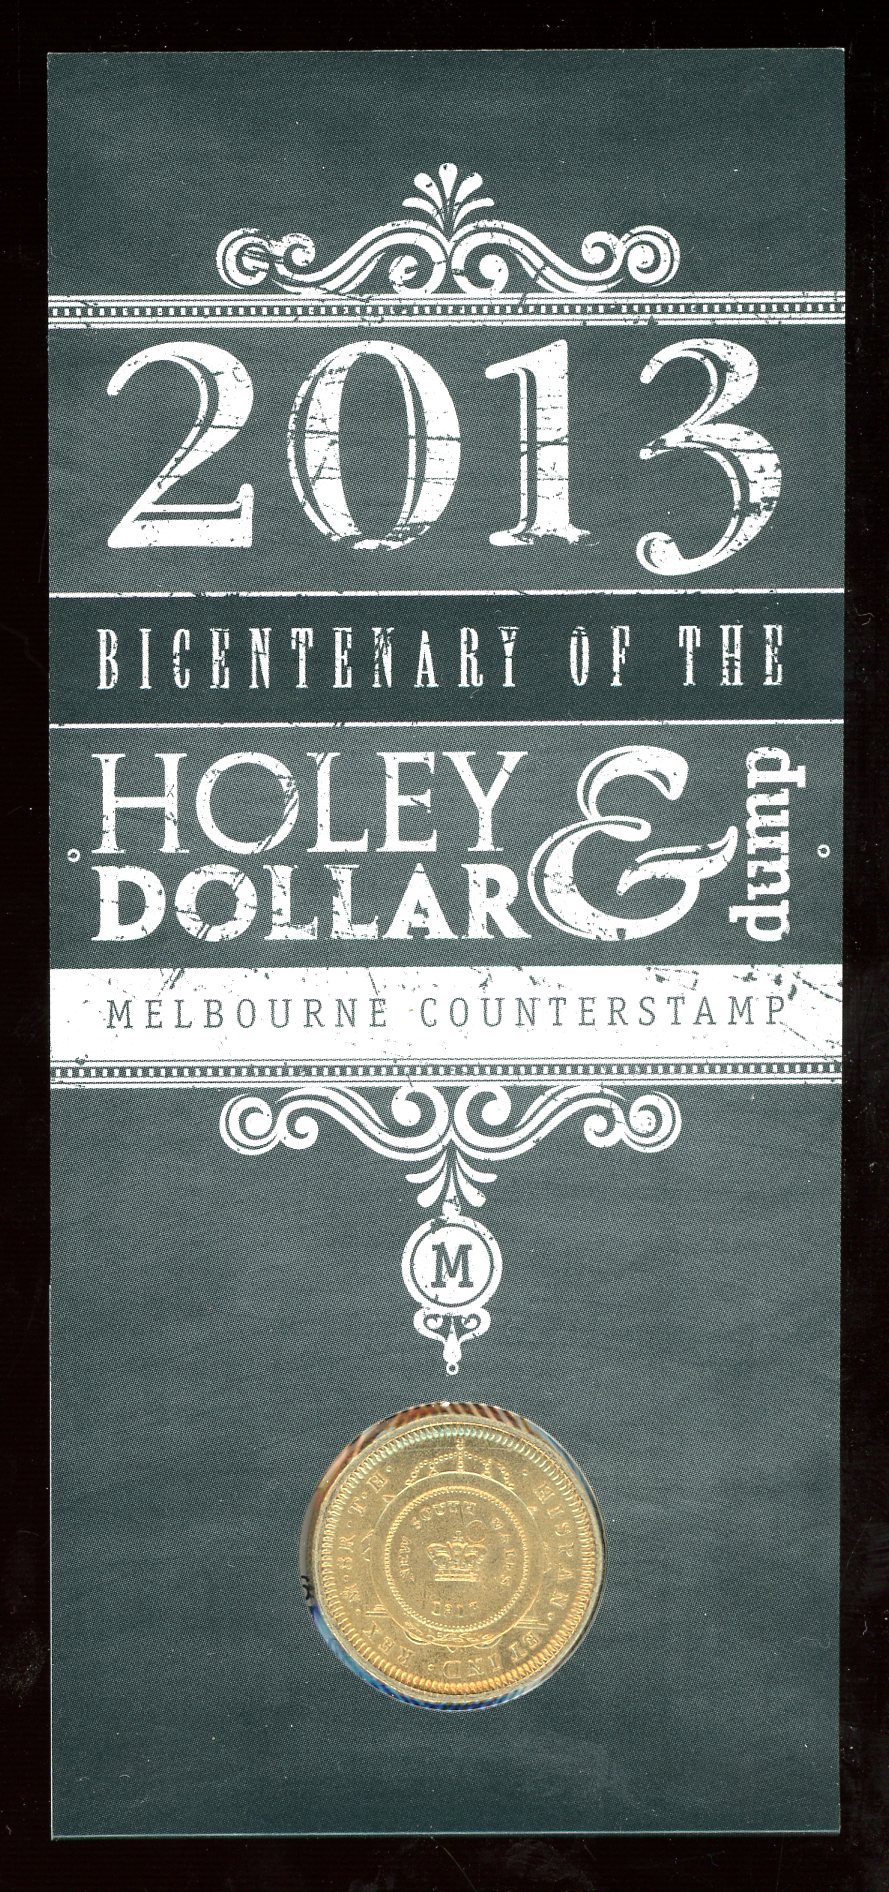 Thumbnail for 2013 Holey Dollar & Dump Bicentenary - Melbourne Counterstamp